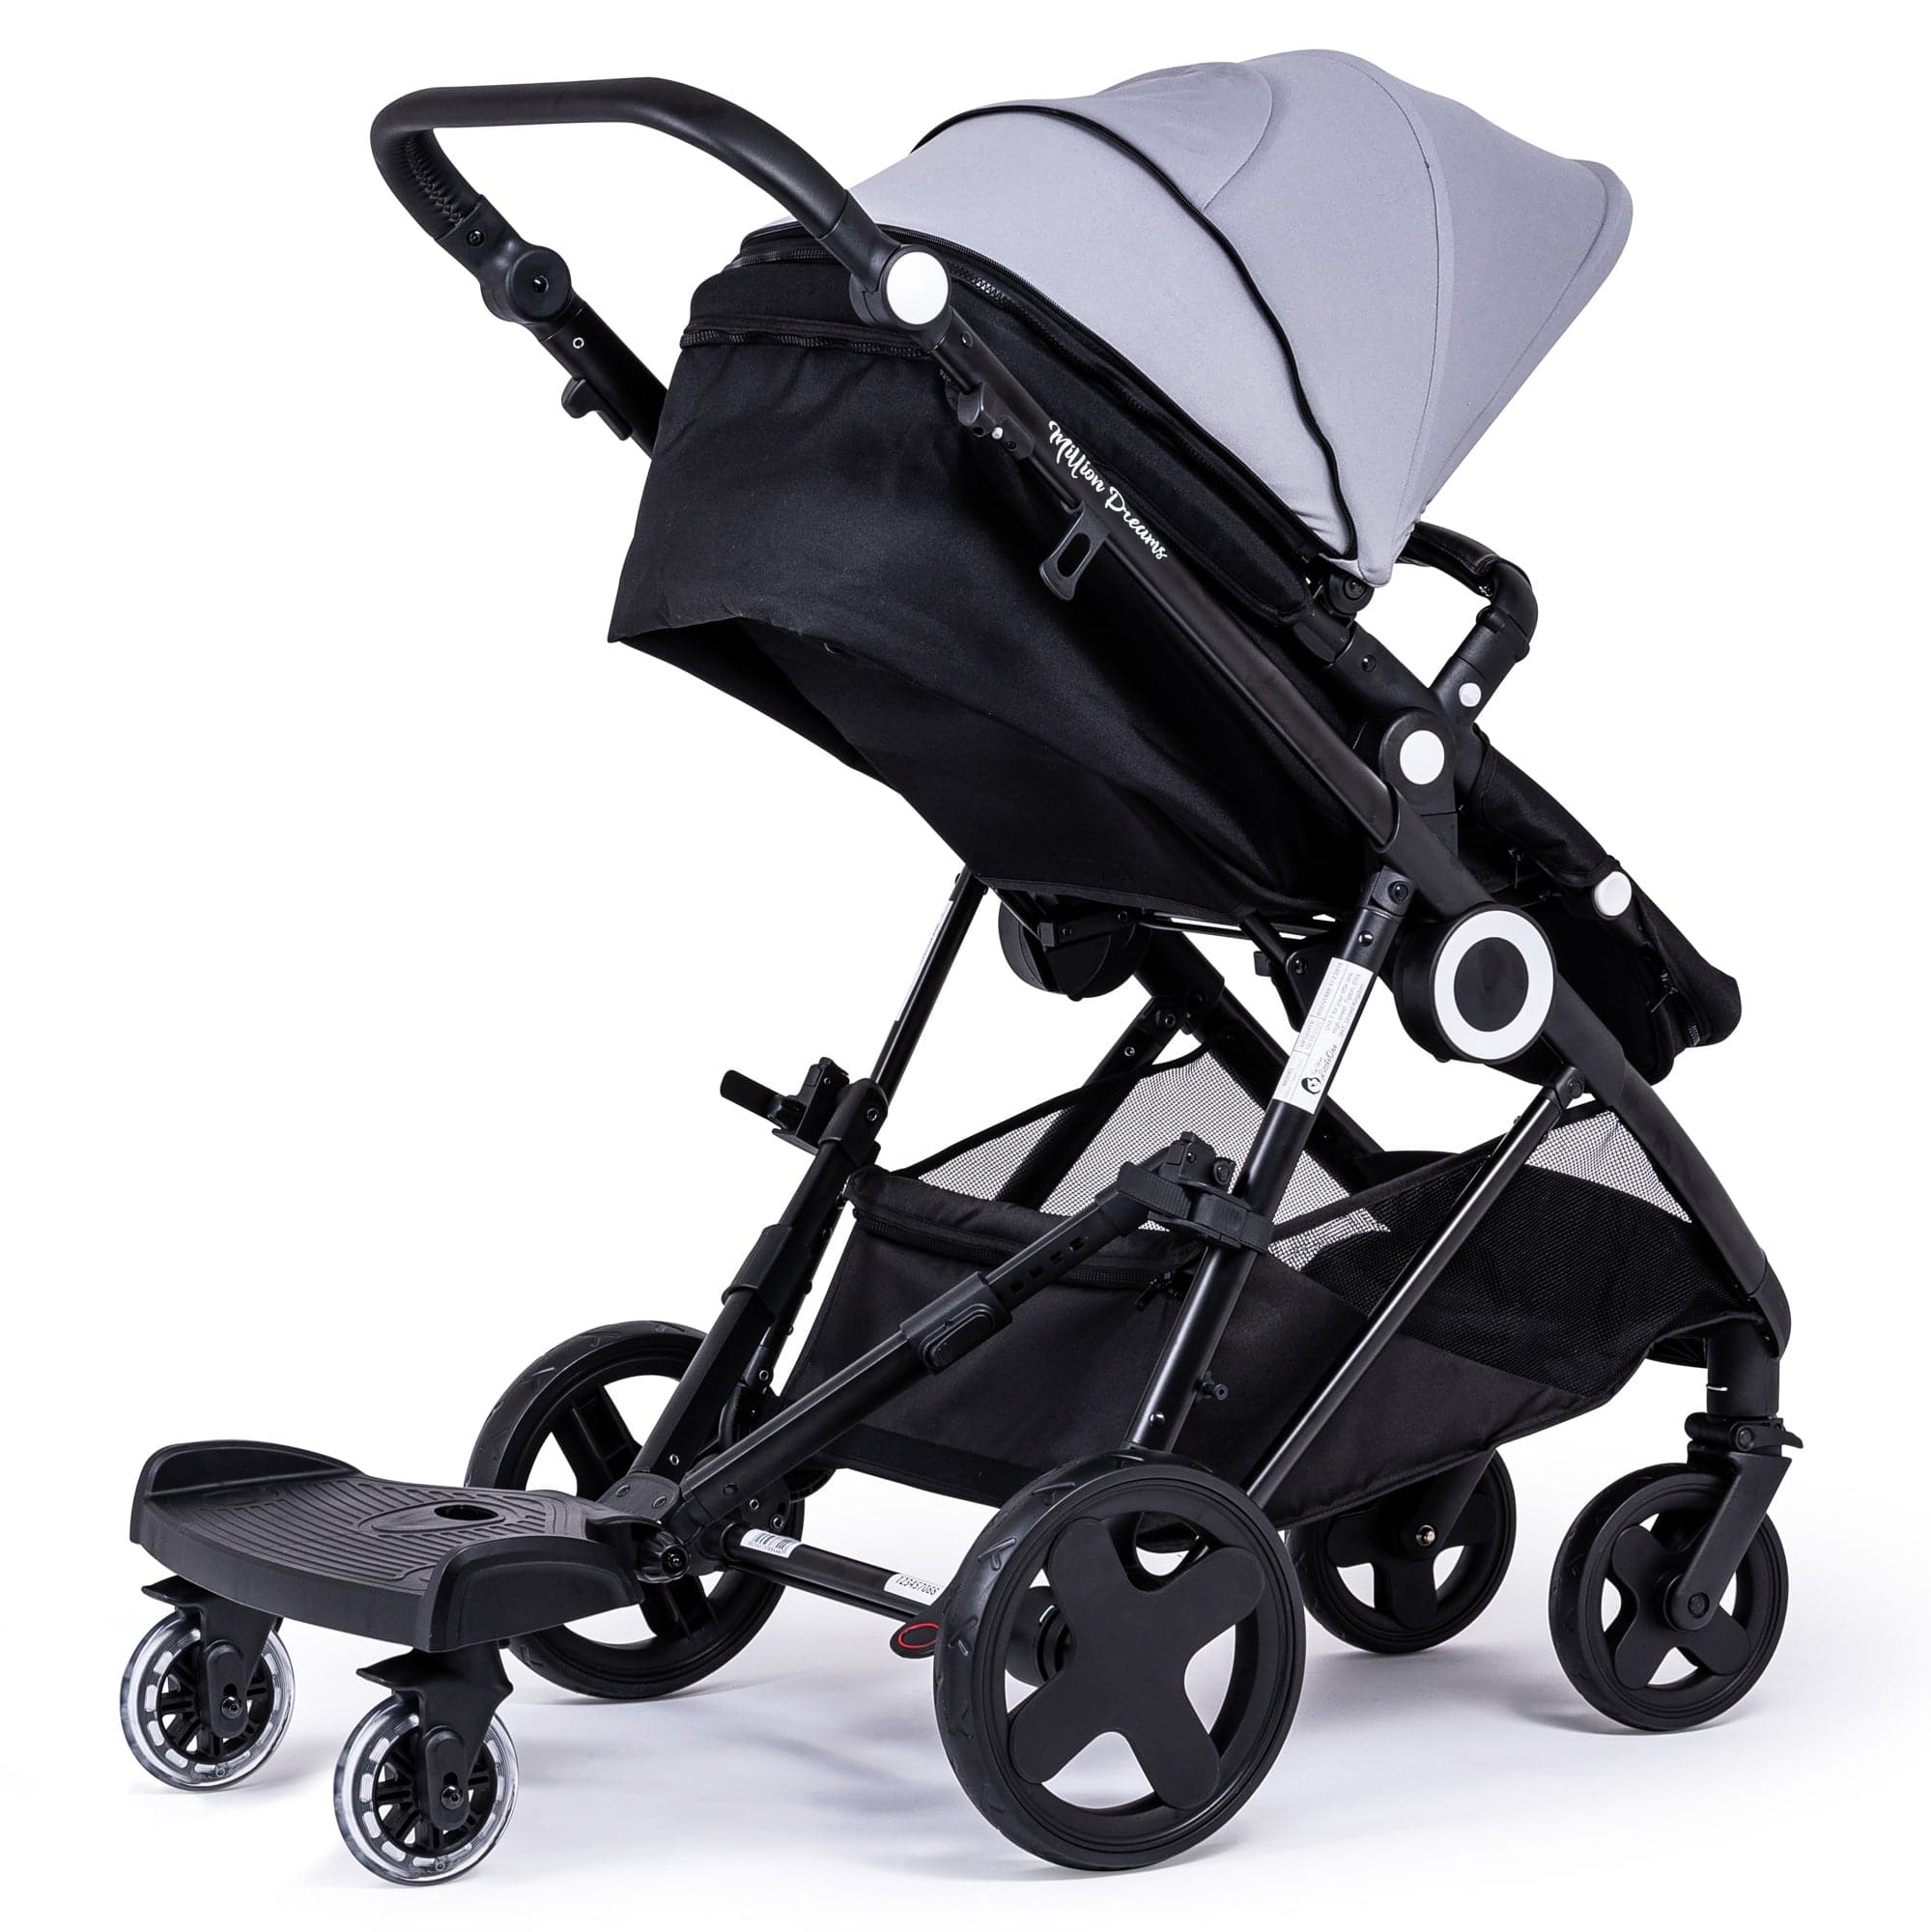 Ride On Board with Seat Compatible with Orbit Baby - For Your Little One